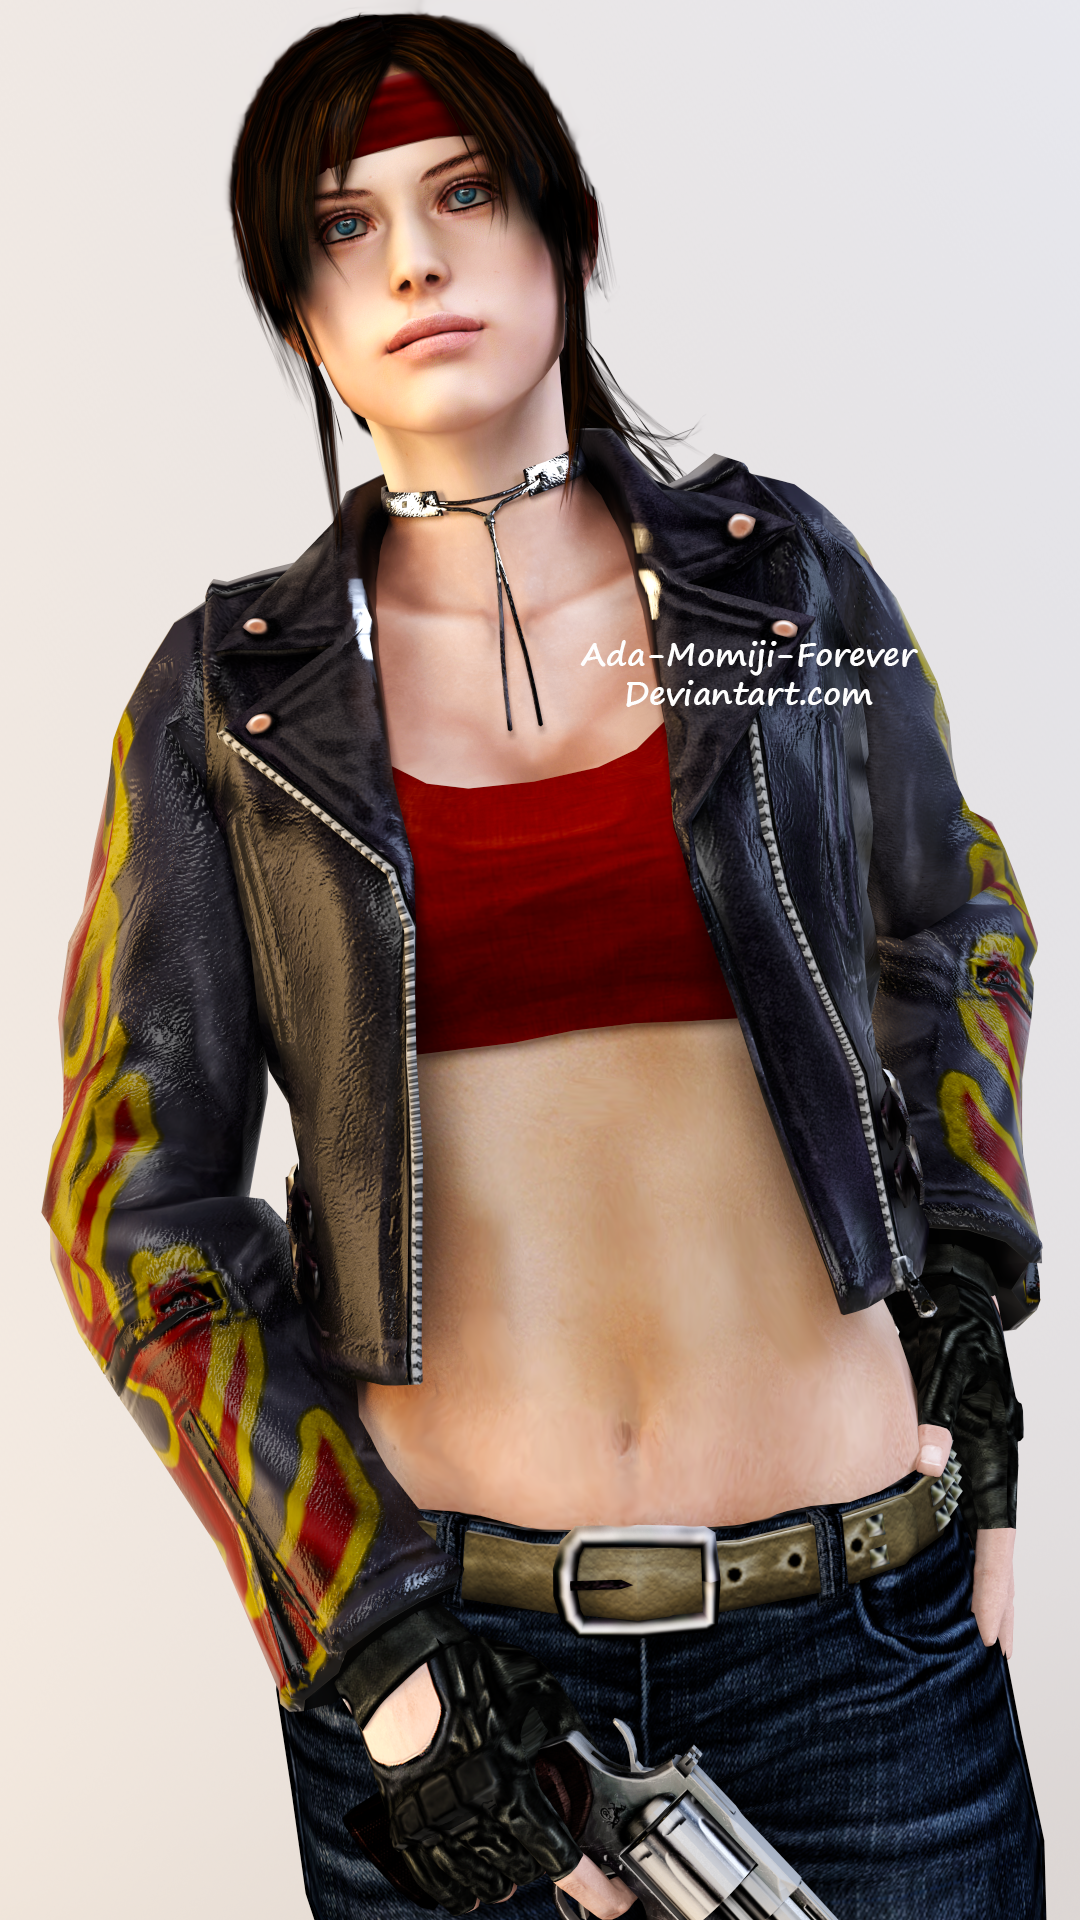 Claire Redfield-Resident Evil 2 Remake by Nabriales-D-Majestic on DeviantArt